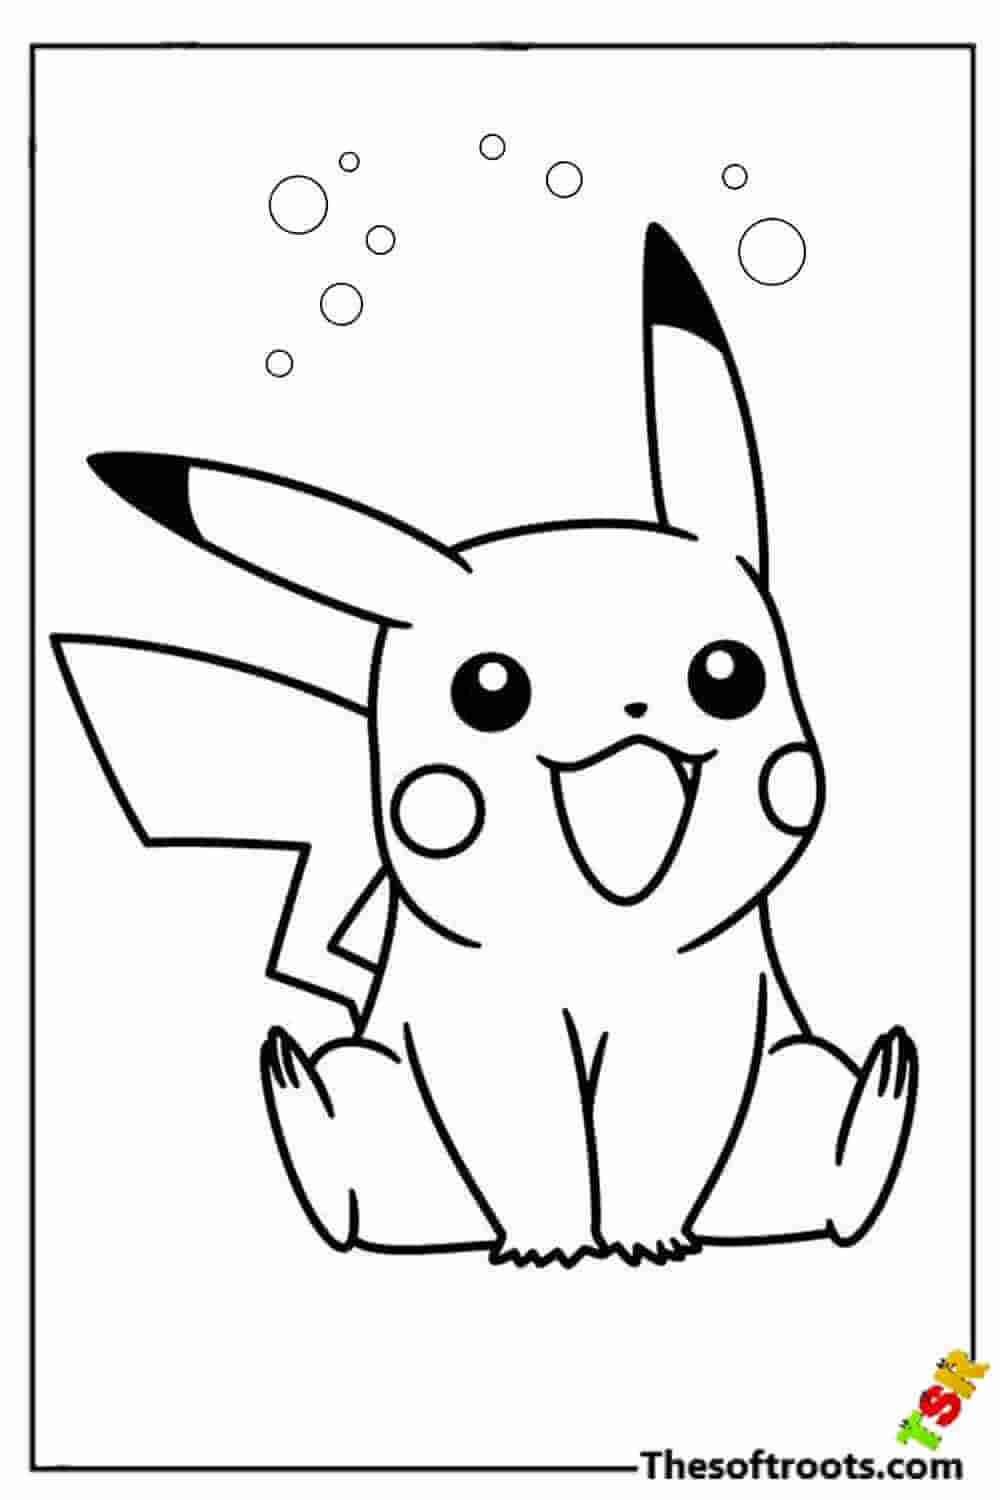 Pikachu coloring pages kids coloring pages